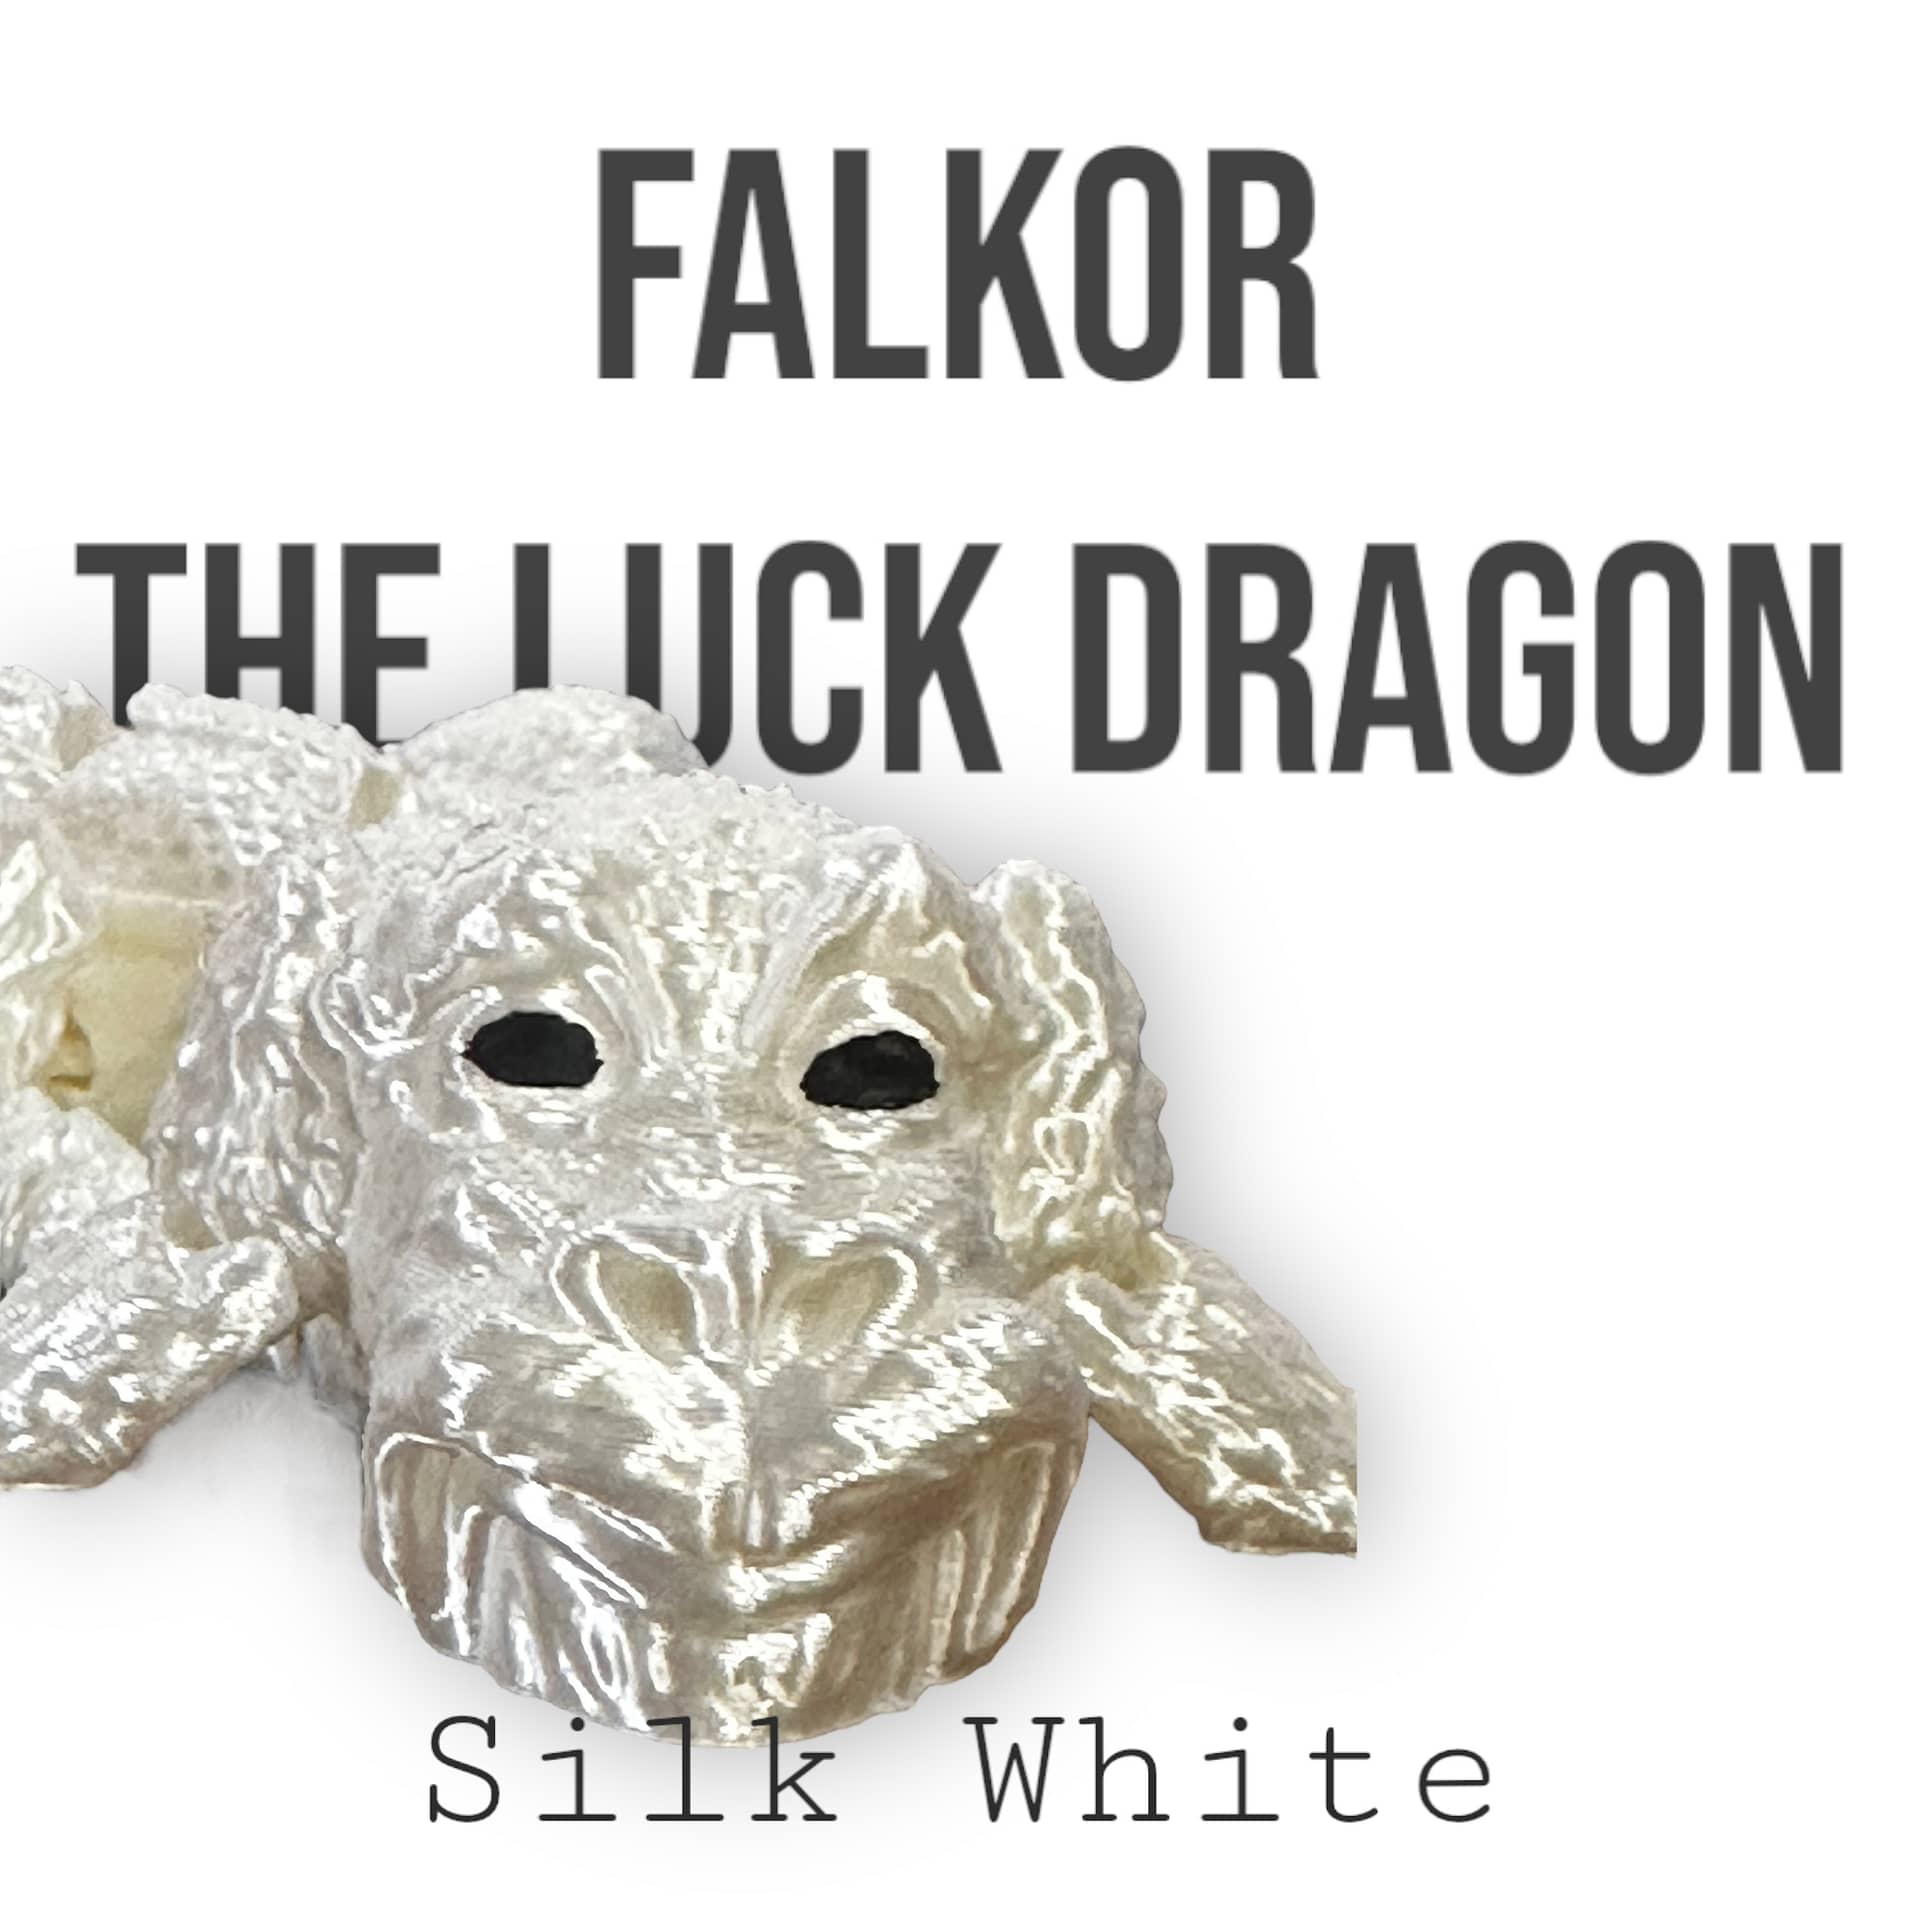 Falkor the luck Dragon (made to order)